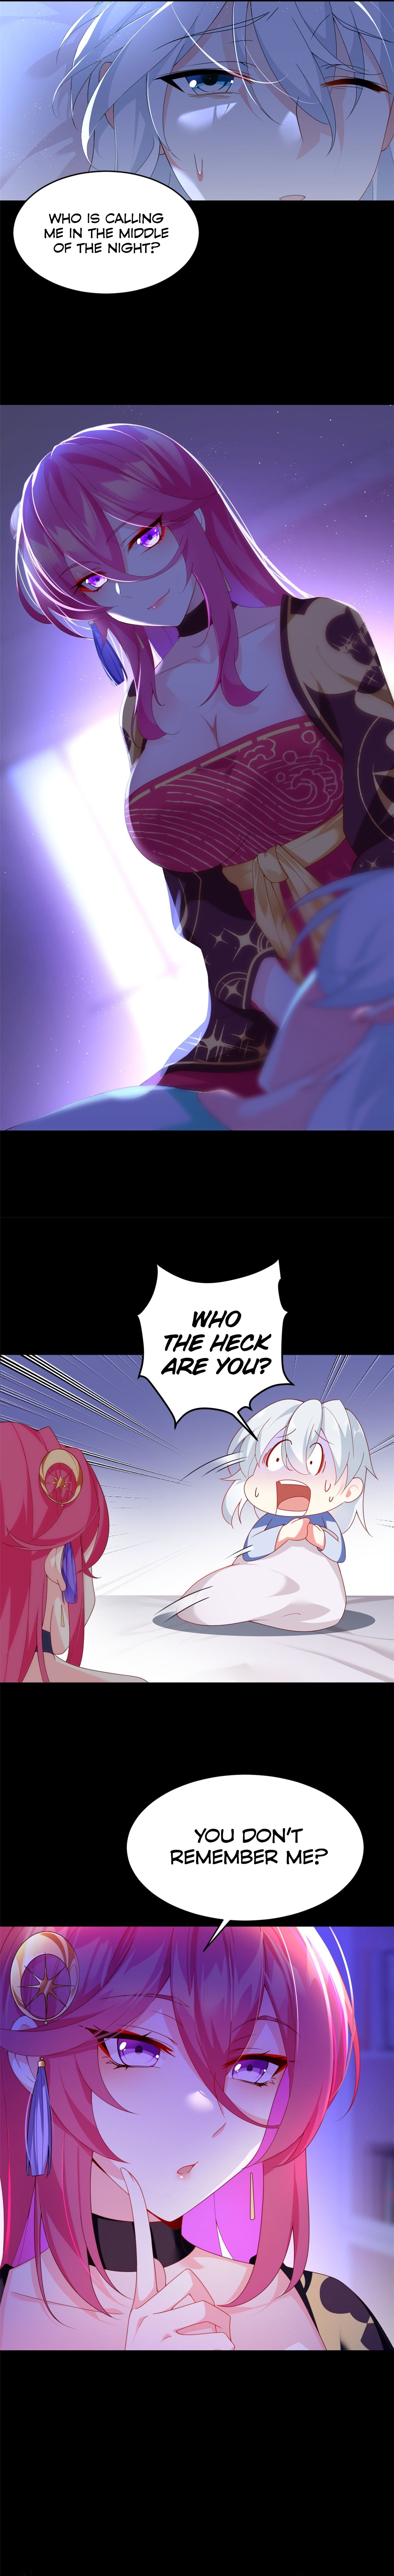 I Eat Soft Rice In Another World - Page 3